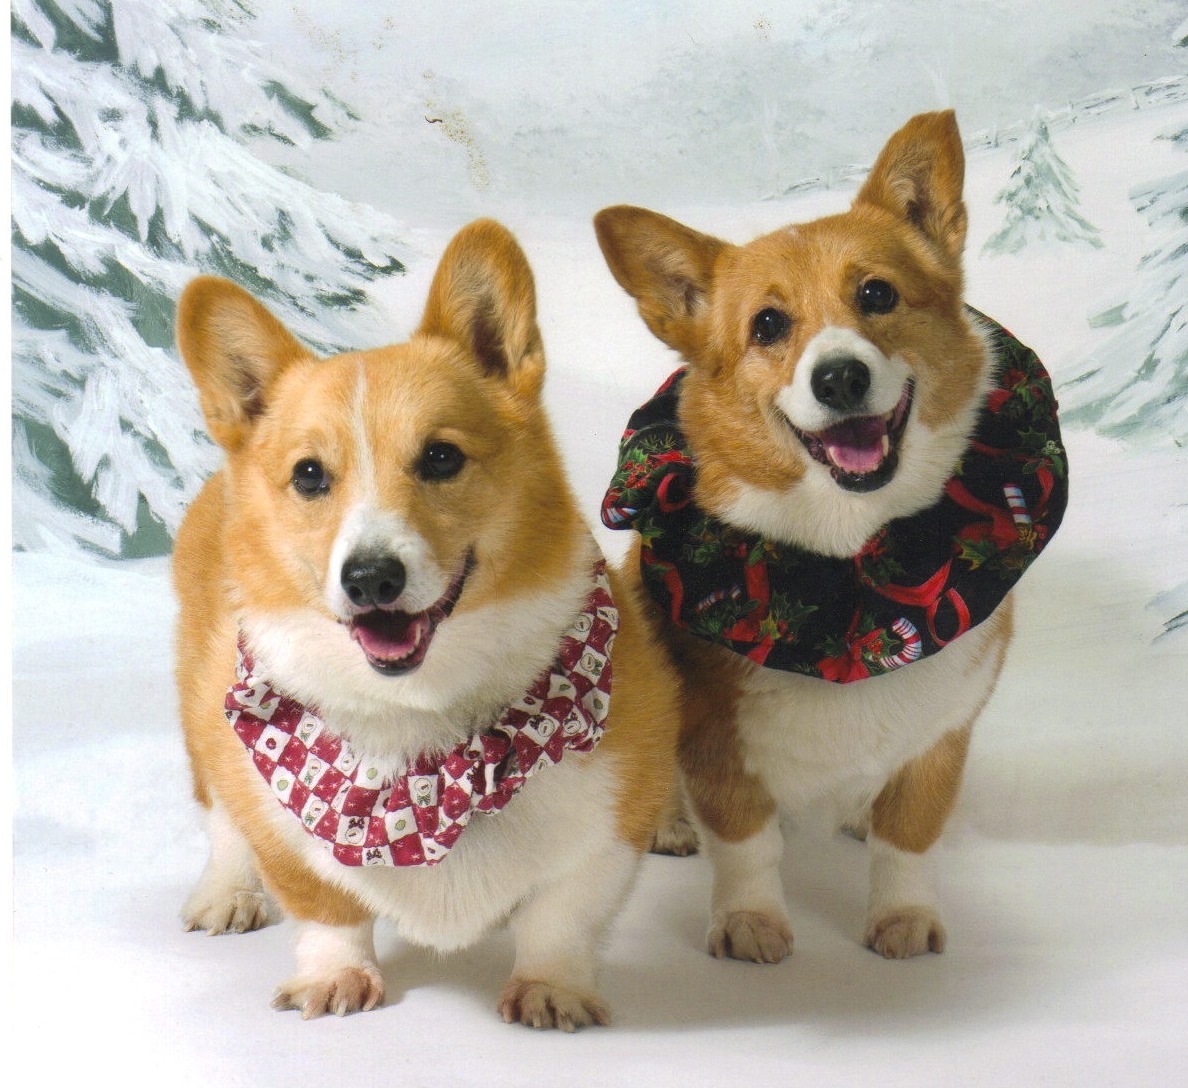 Cowboy And Priya Our Corgi Friends From Massachusetts Sent Us This